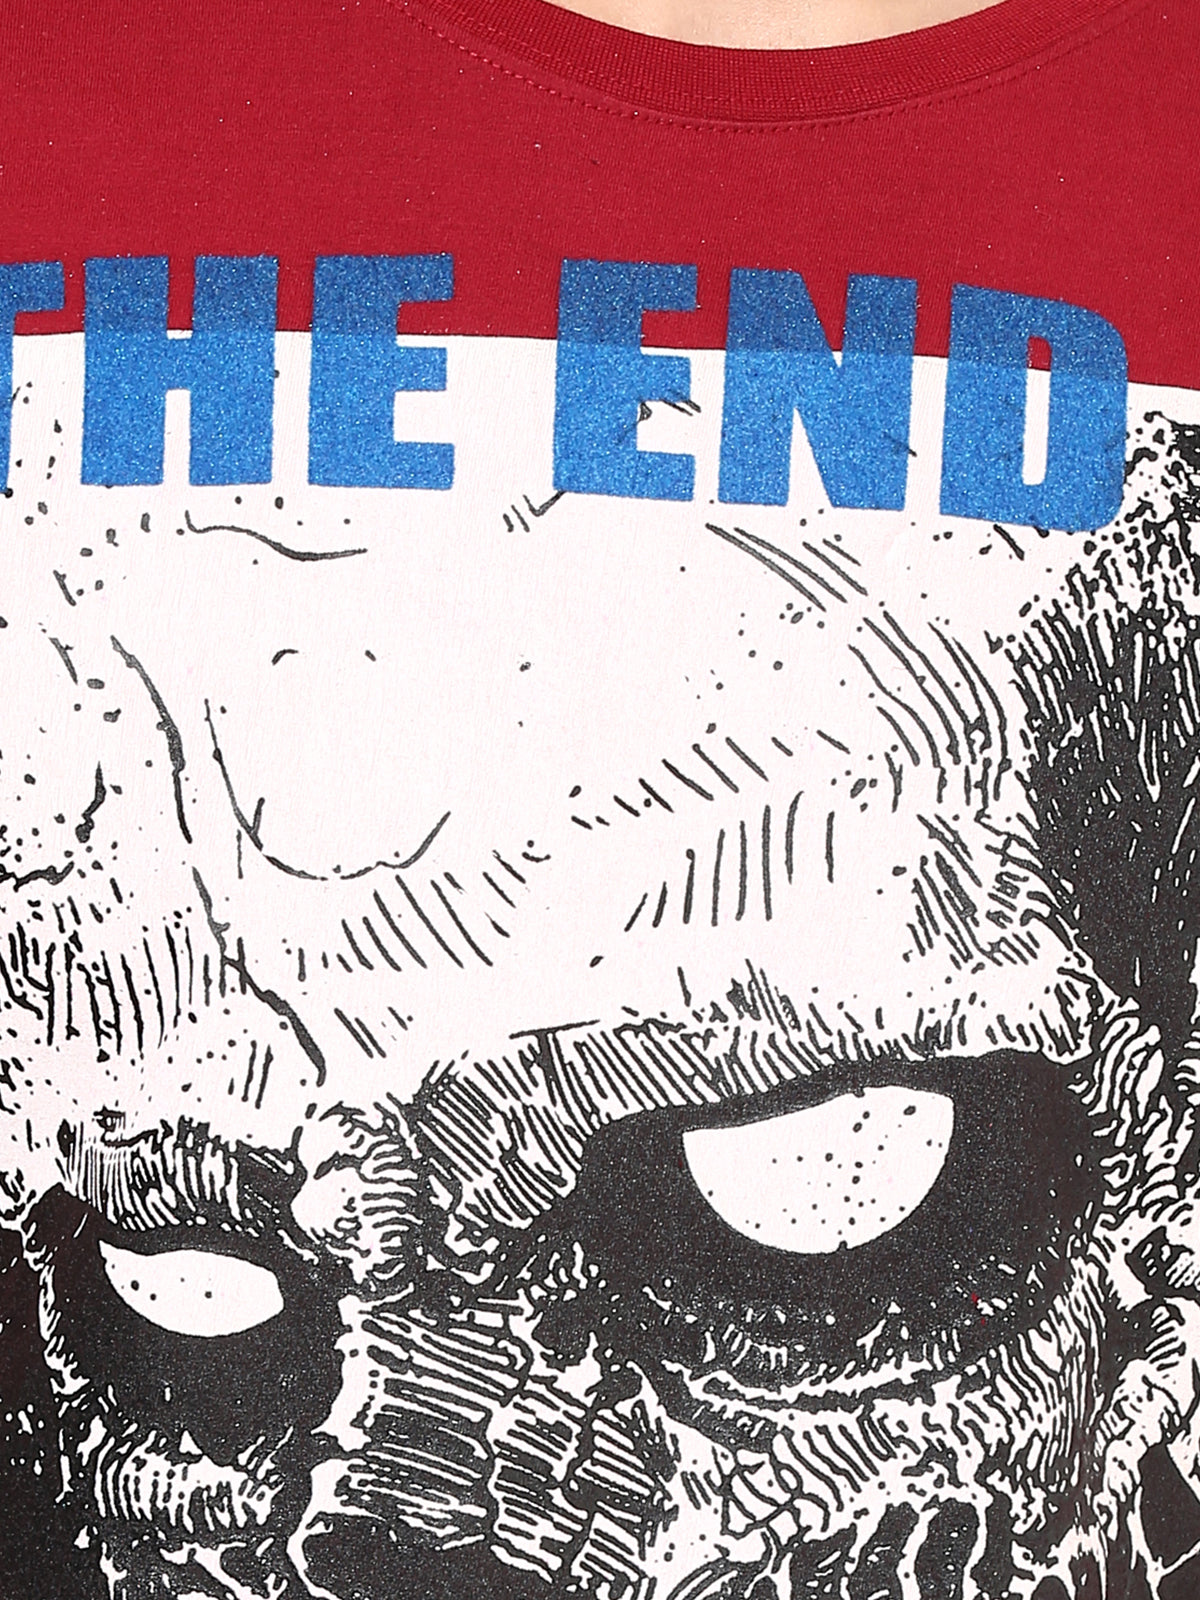 THE-END-IS-HERE